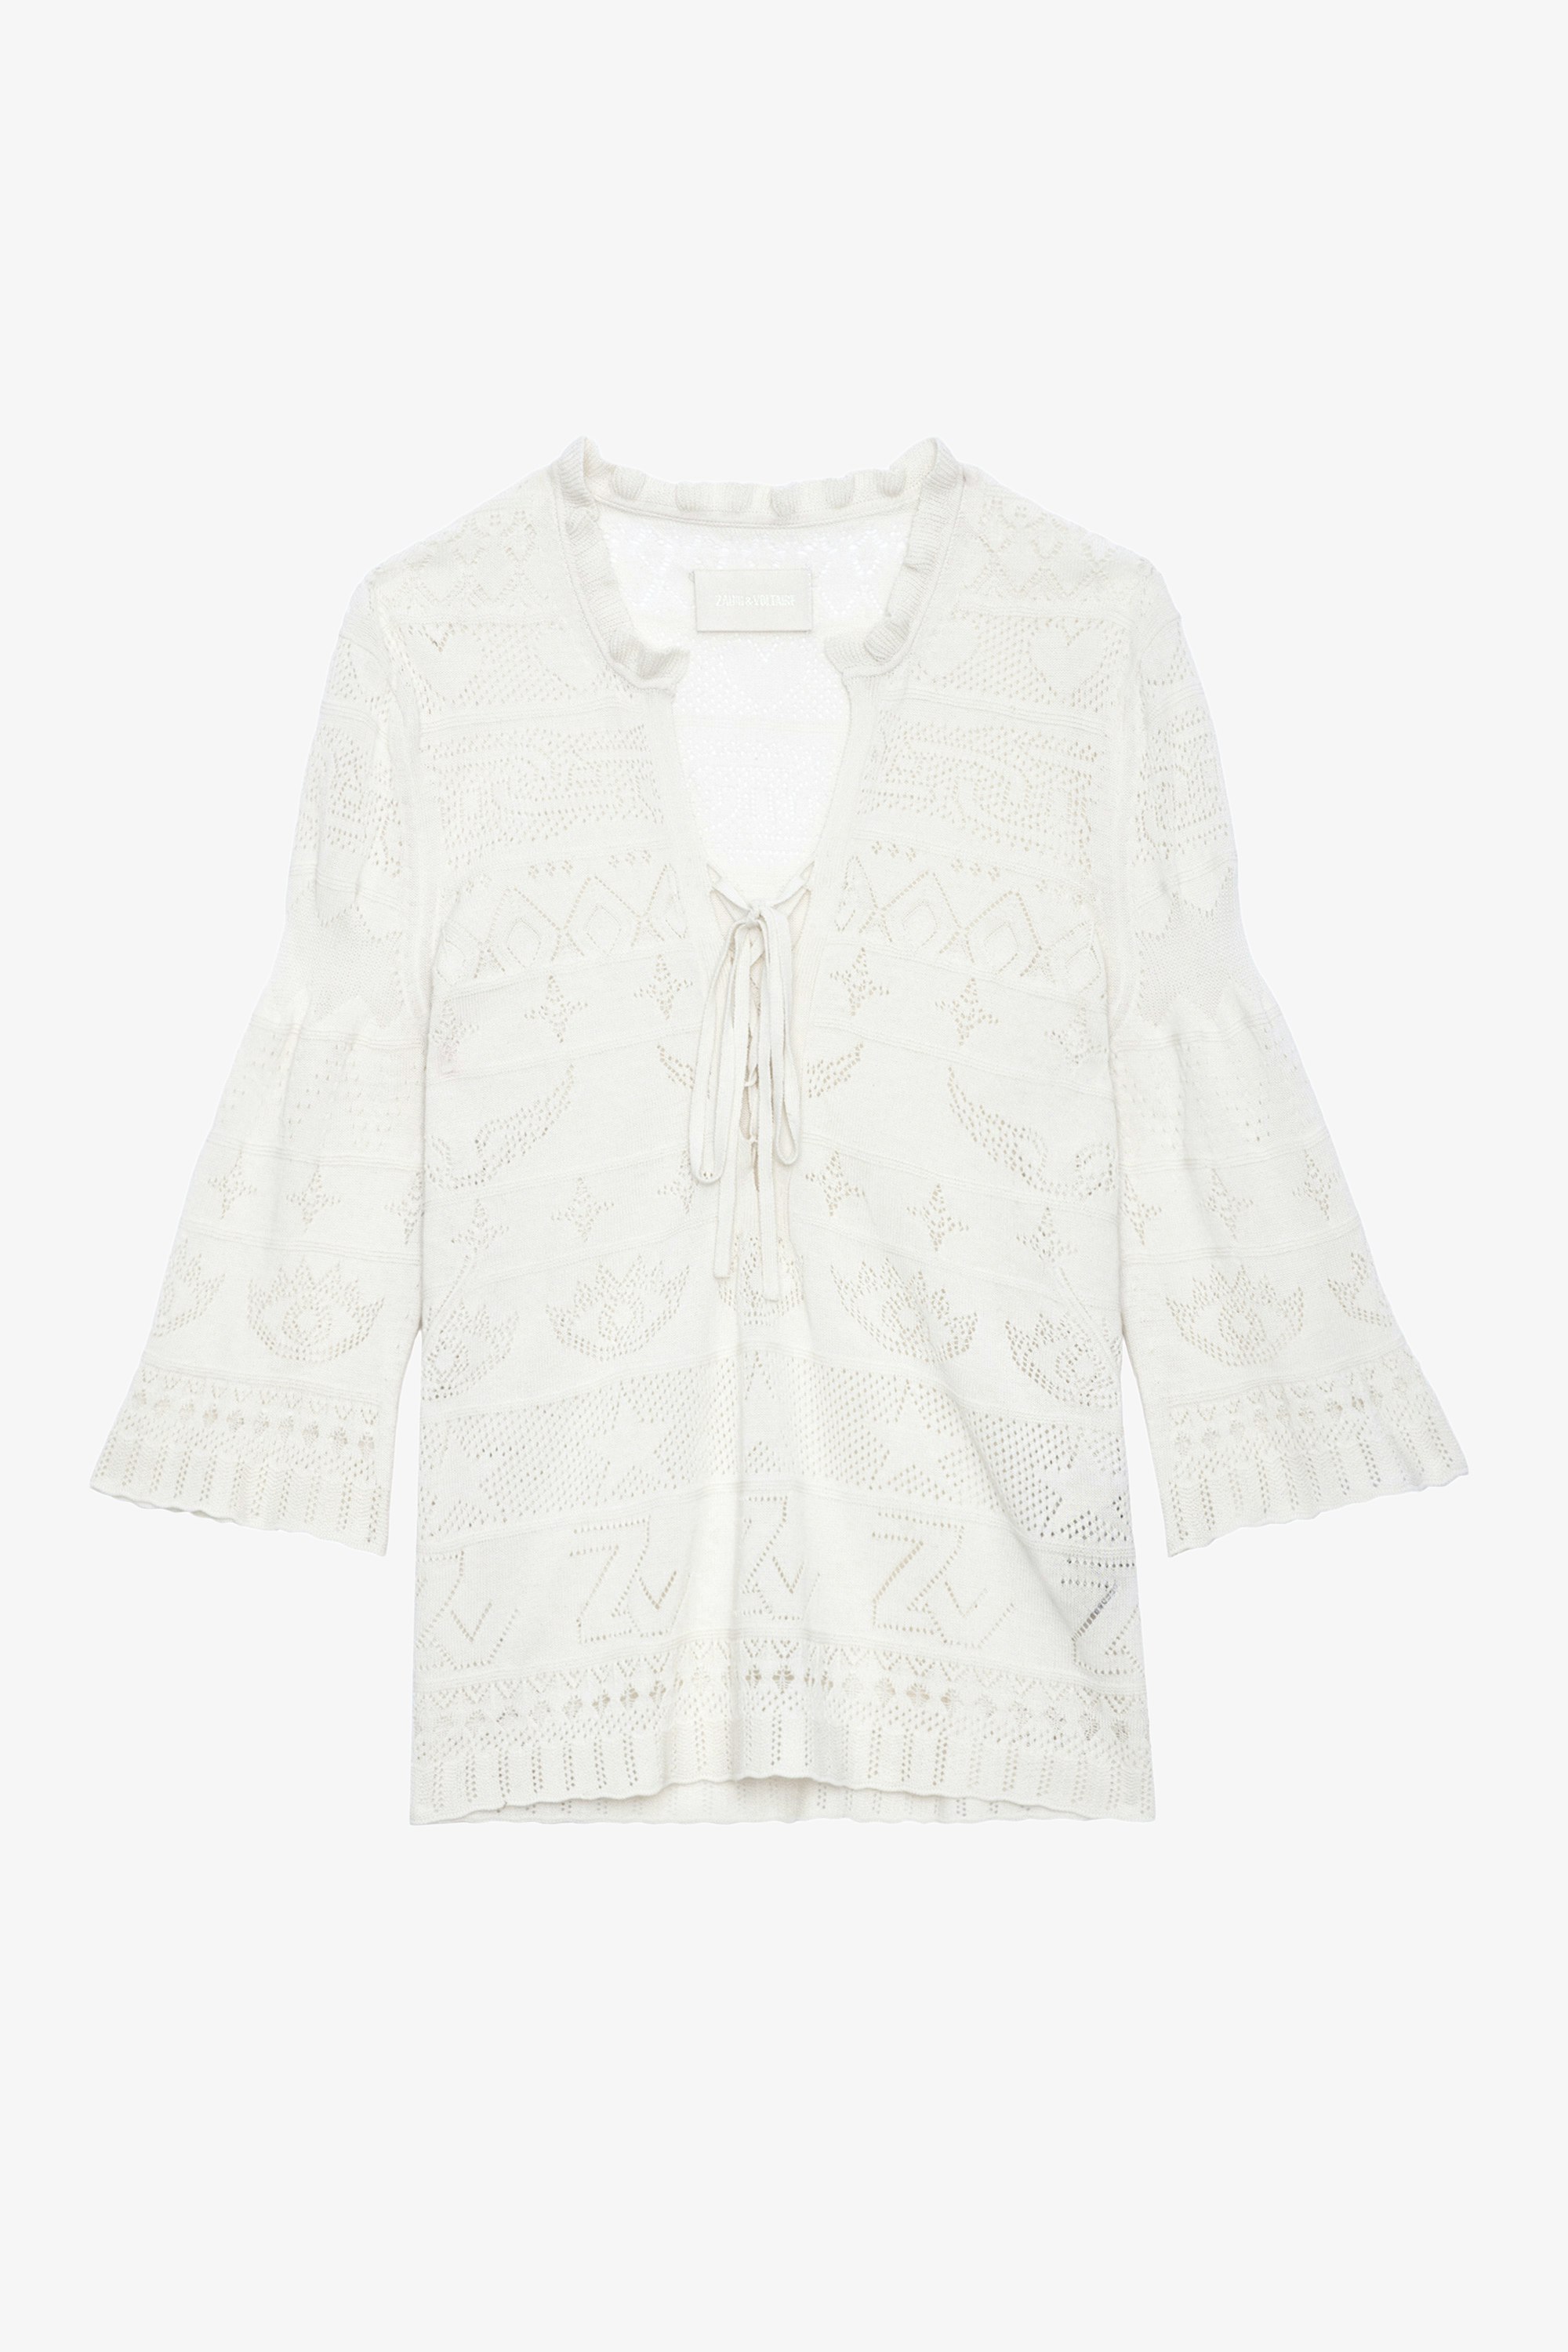 Taho Jumper - Ecru lace cotton jumper with 3/4-length sleeves, openwork motifs and ties.